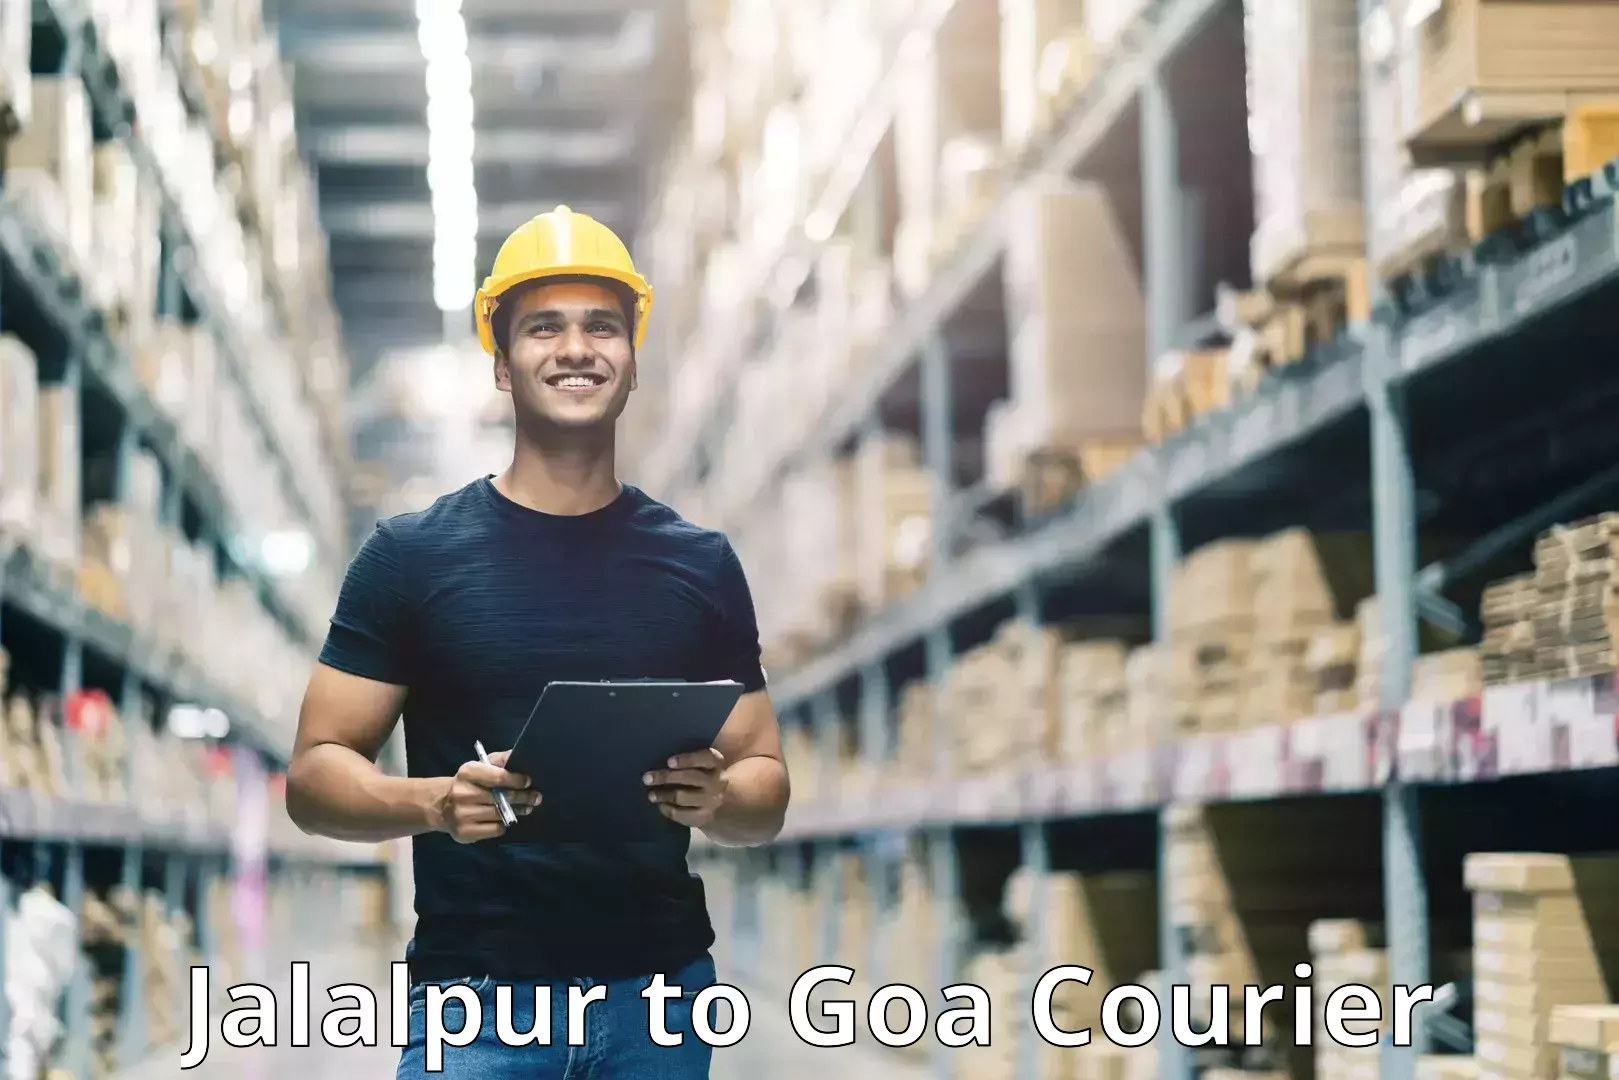 User-friendly delivery service Jalalpur to Goa